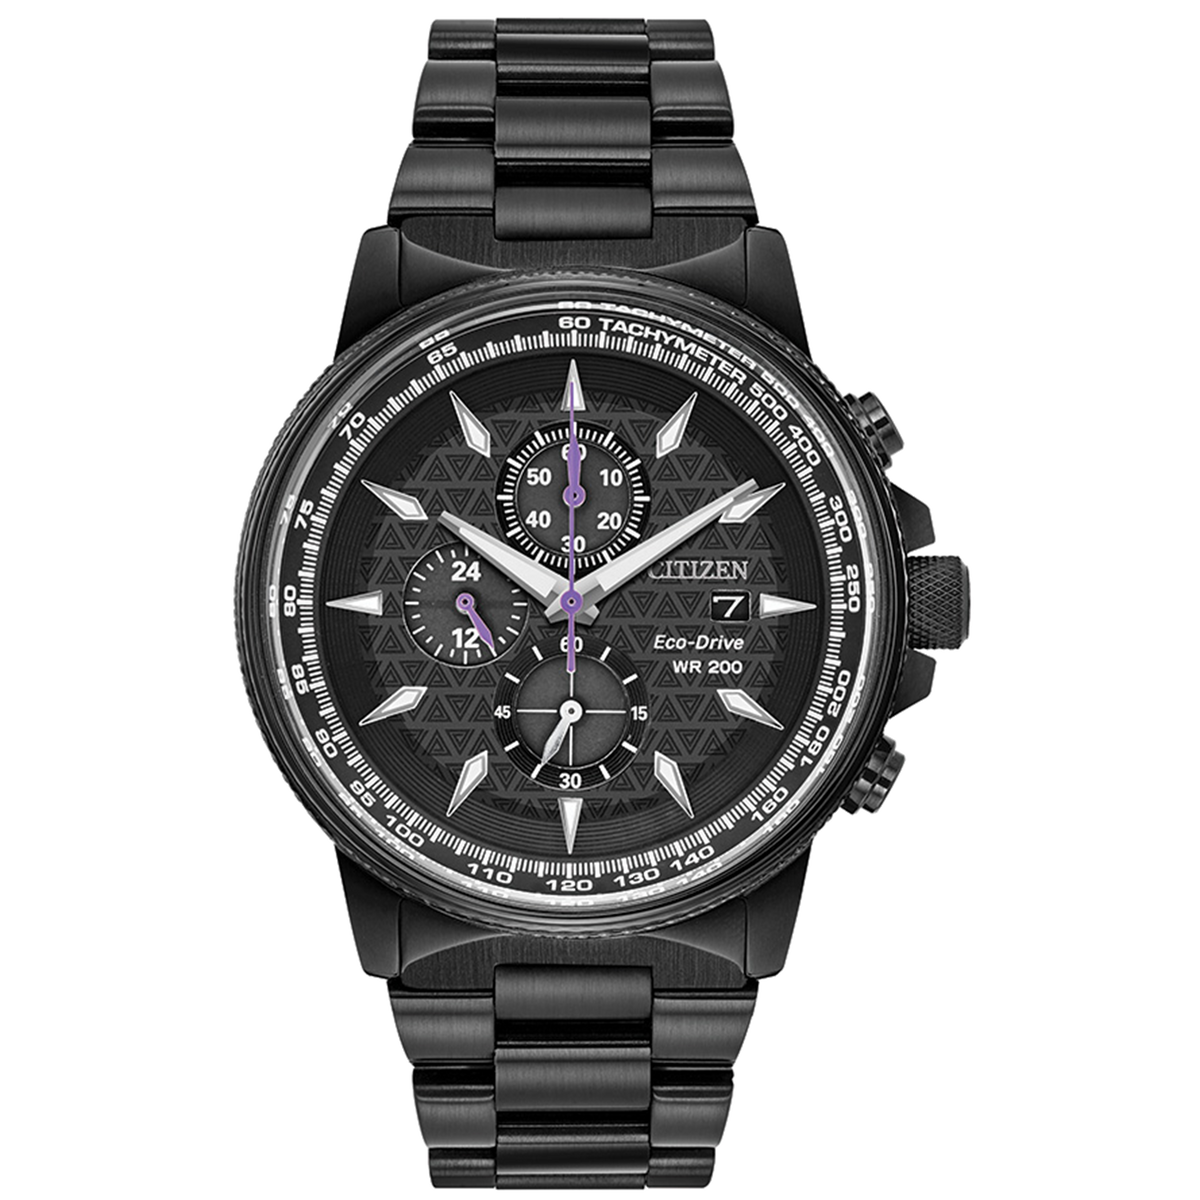 Citizen Eco-Drive: Marvel Black Panther Watch